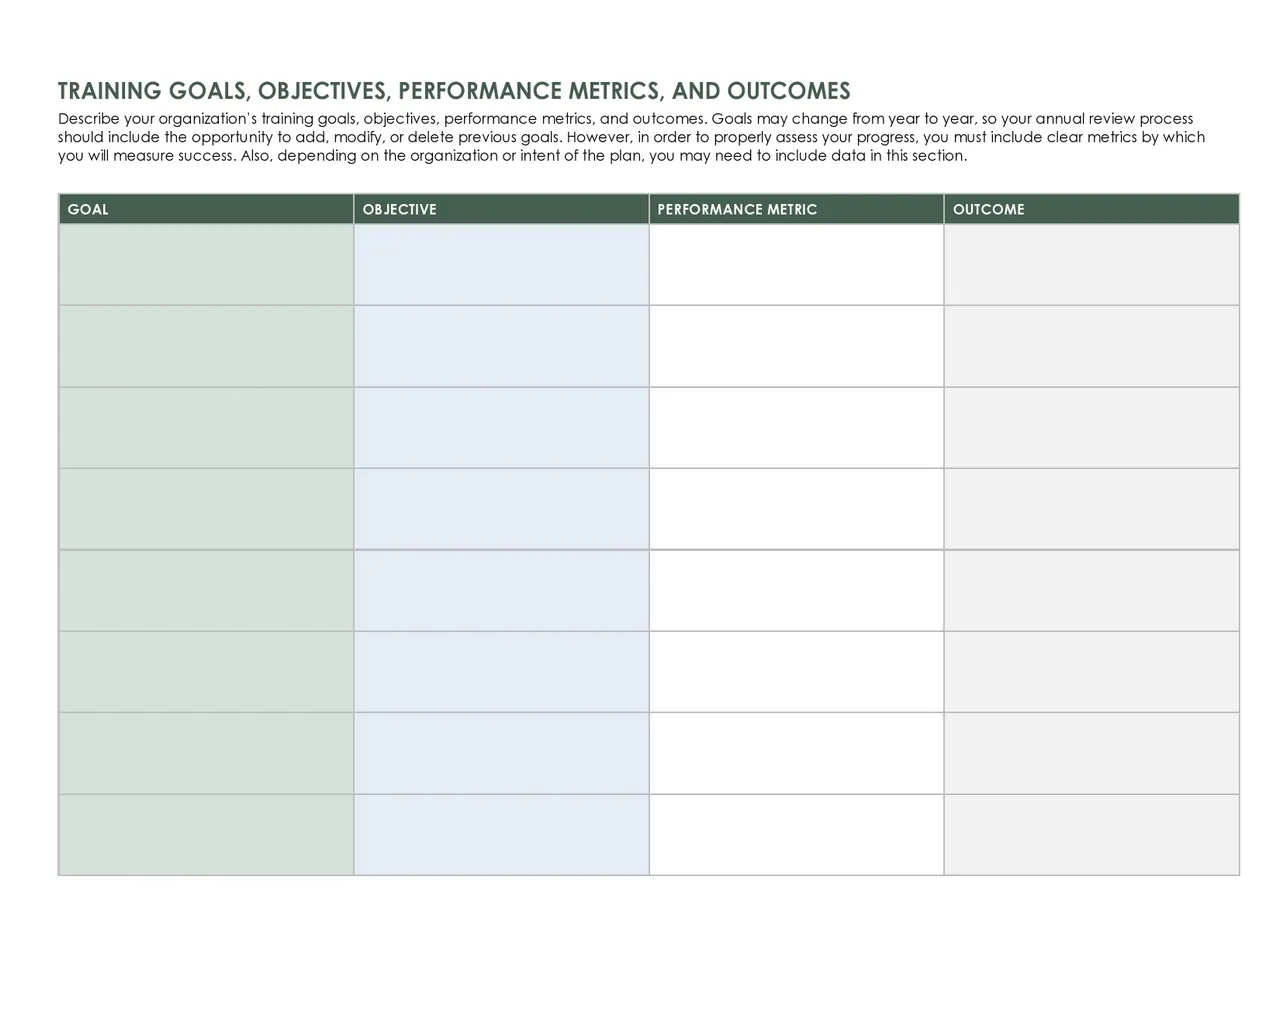 Annual Training Plan Template Excel 03